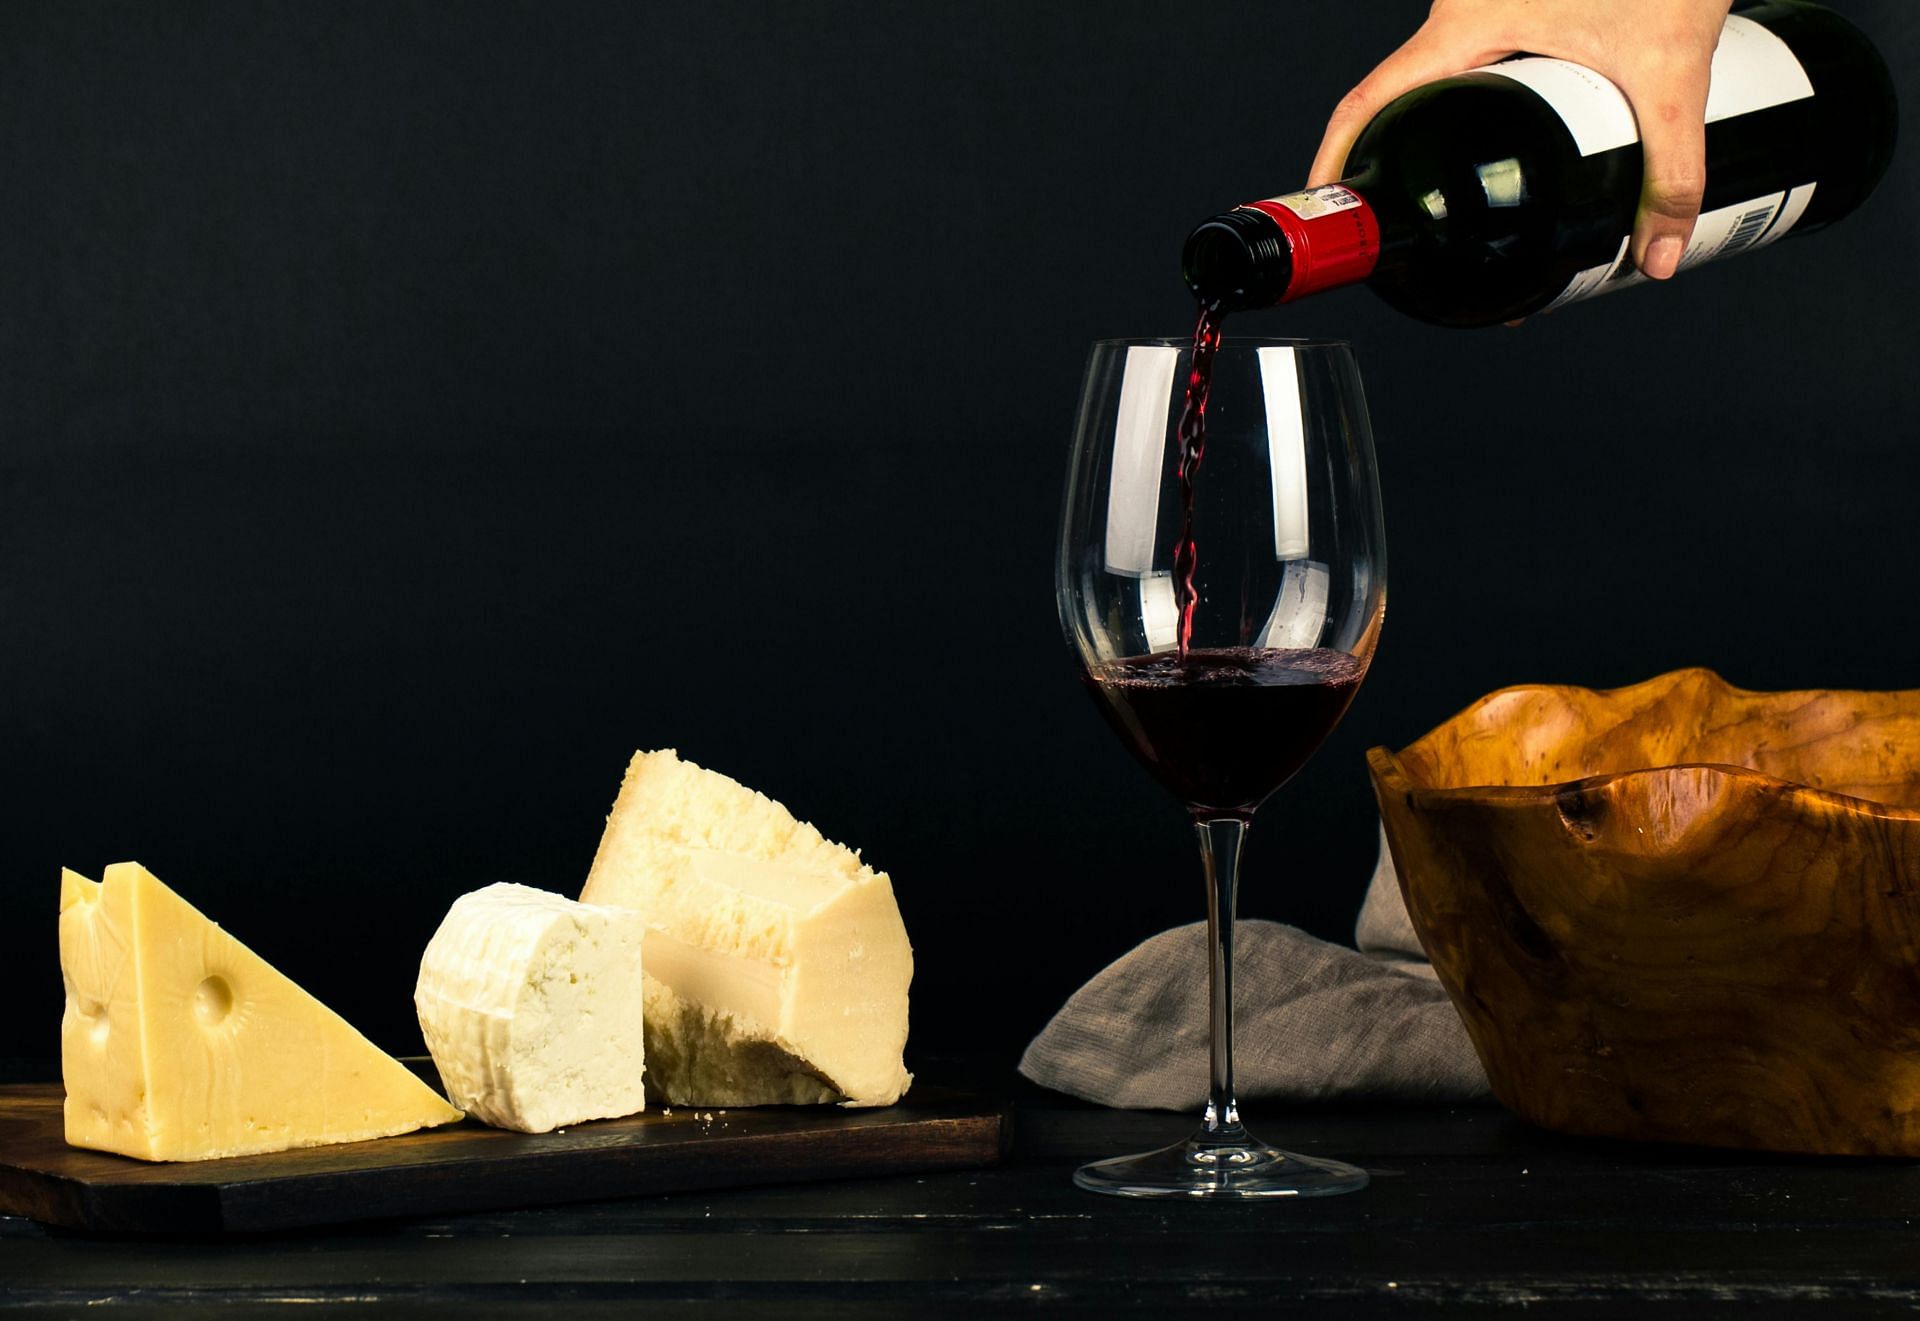 Red wine side effects (image sourced via Pexels / Photo by ray piedra)